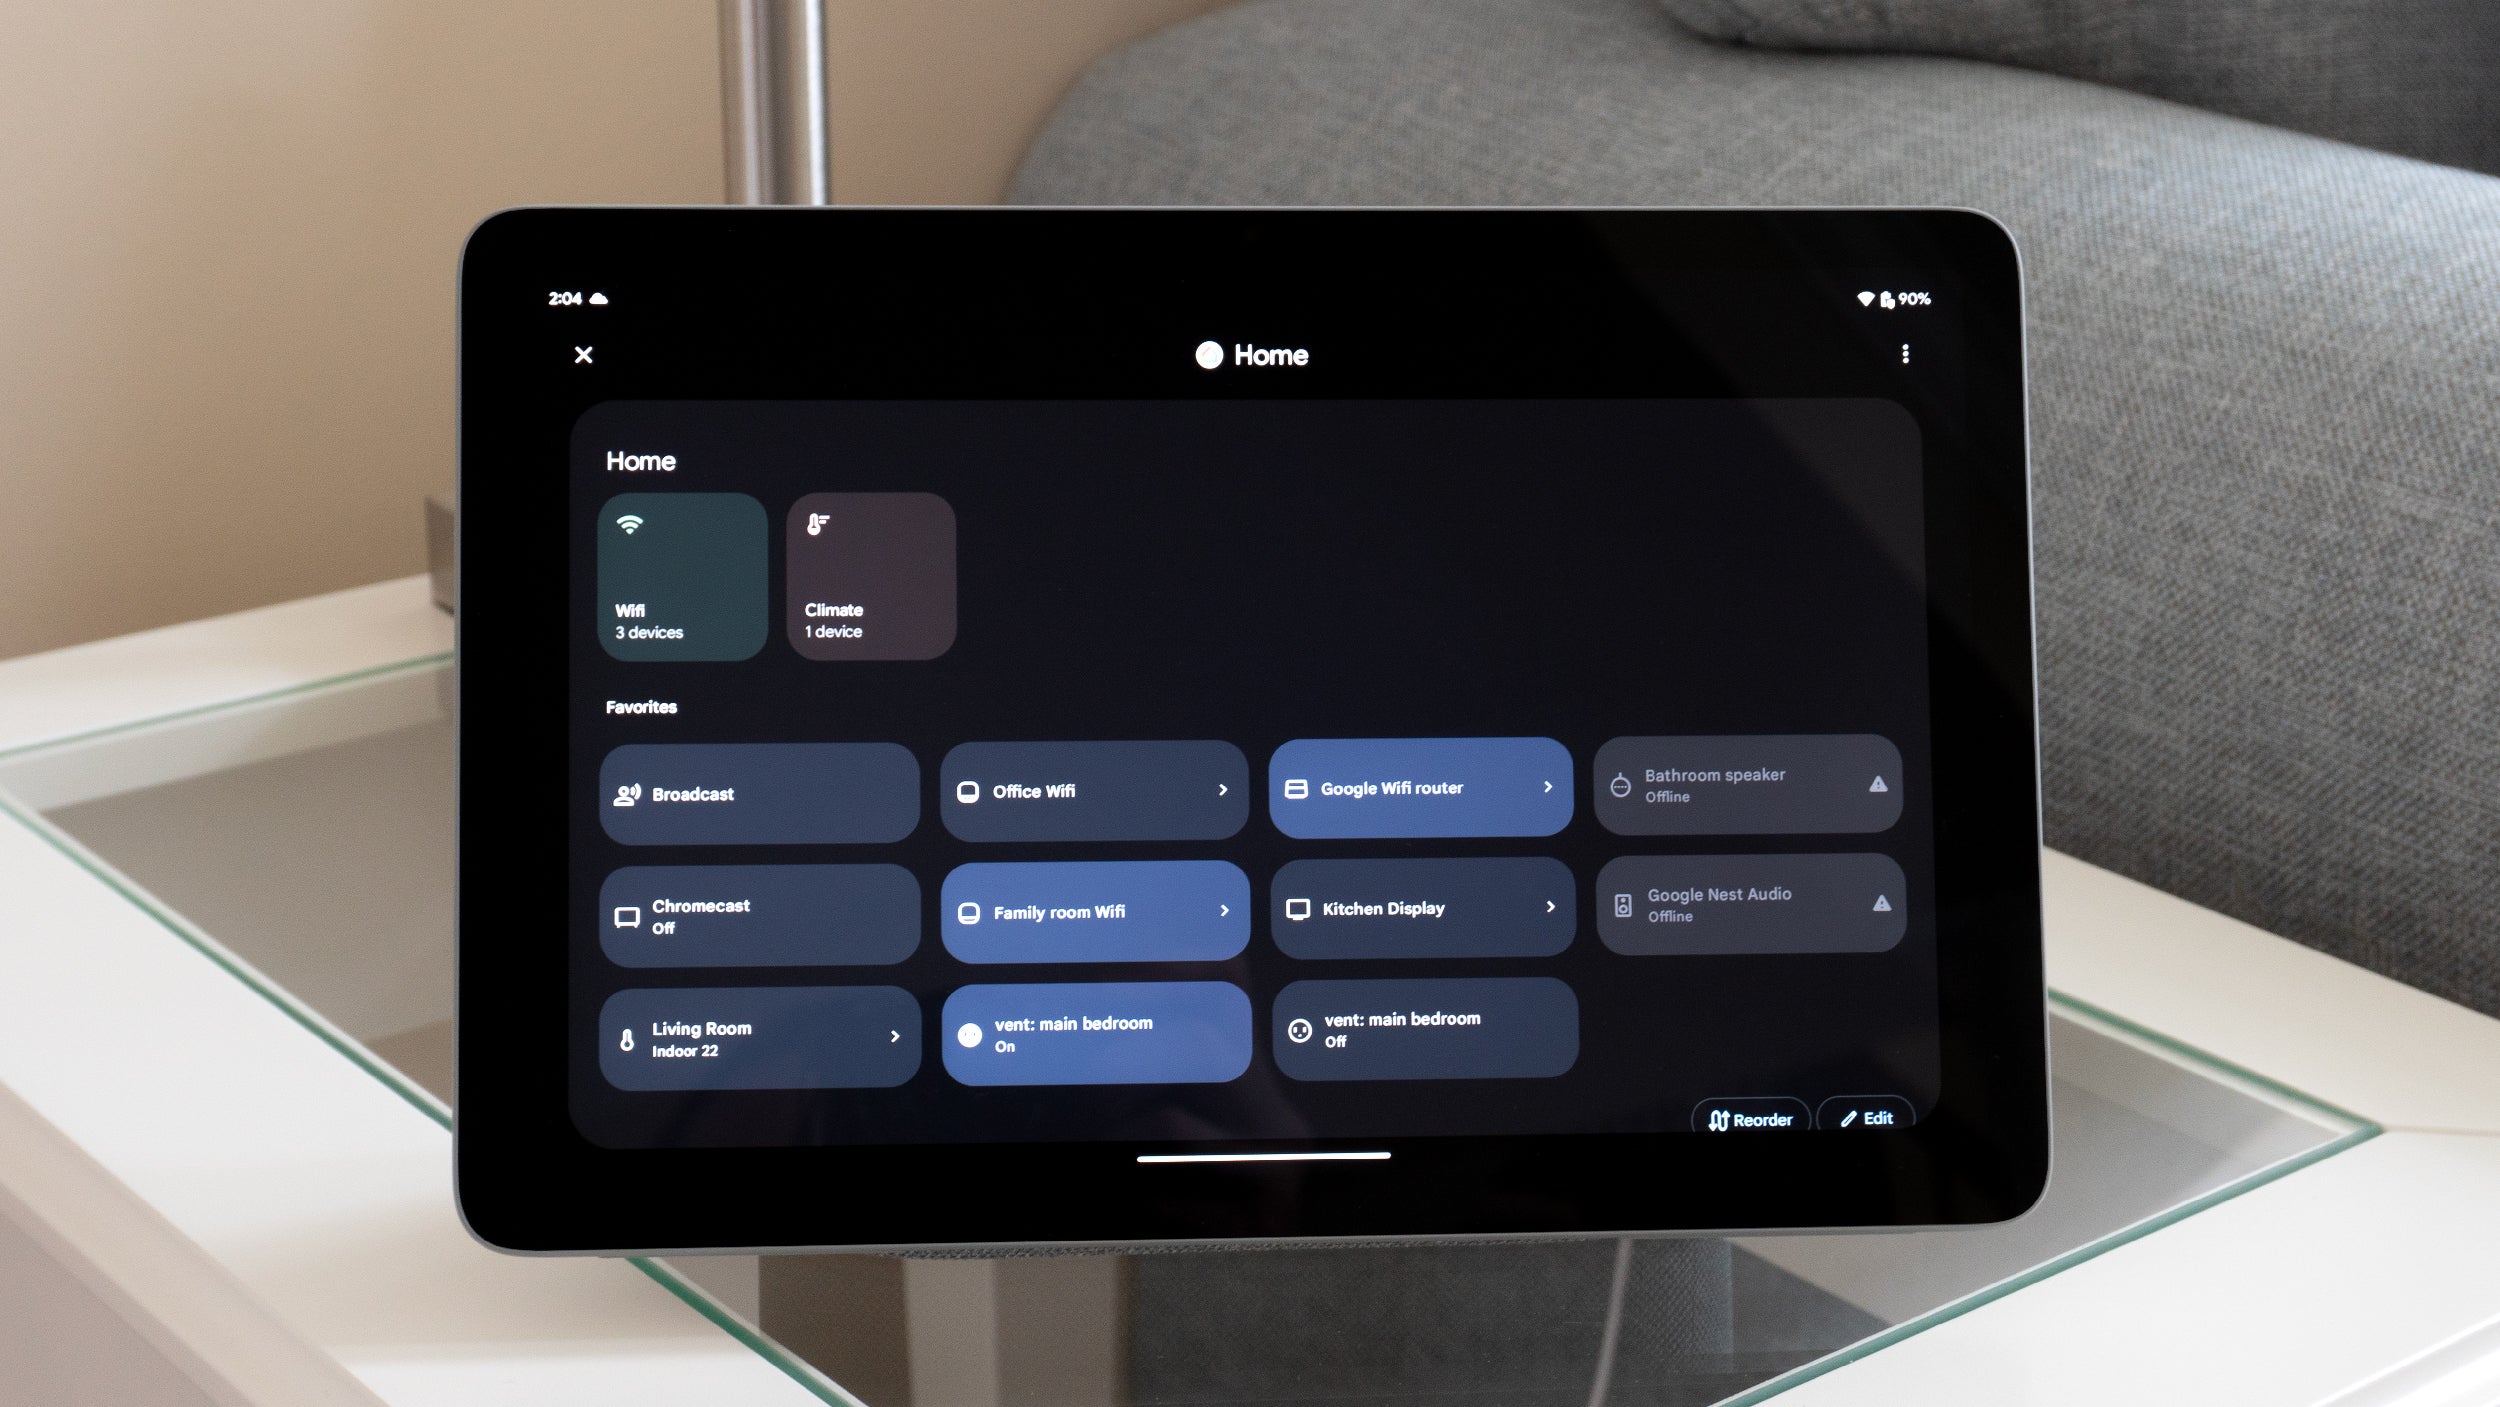 When docked, the Pixel Tablet goes into a new Android Hub Mode, providing easy access to smart home controls, even if the Tablet is password protected. (Photo: Andrew Liszewski | Gizmodo)